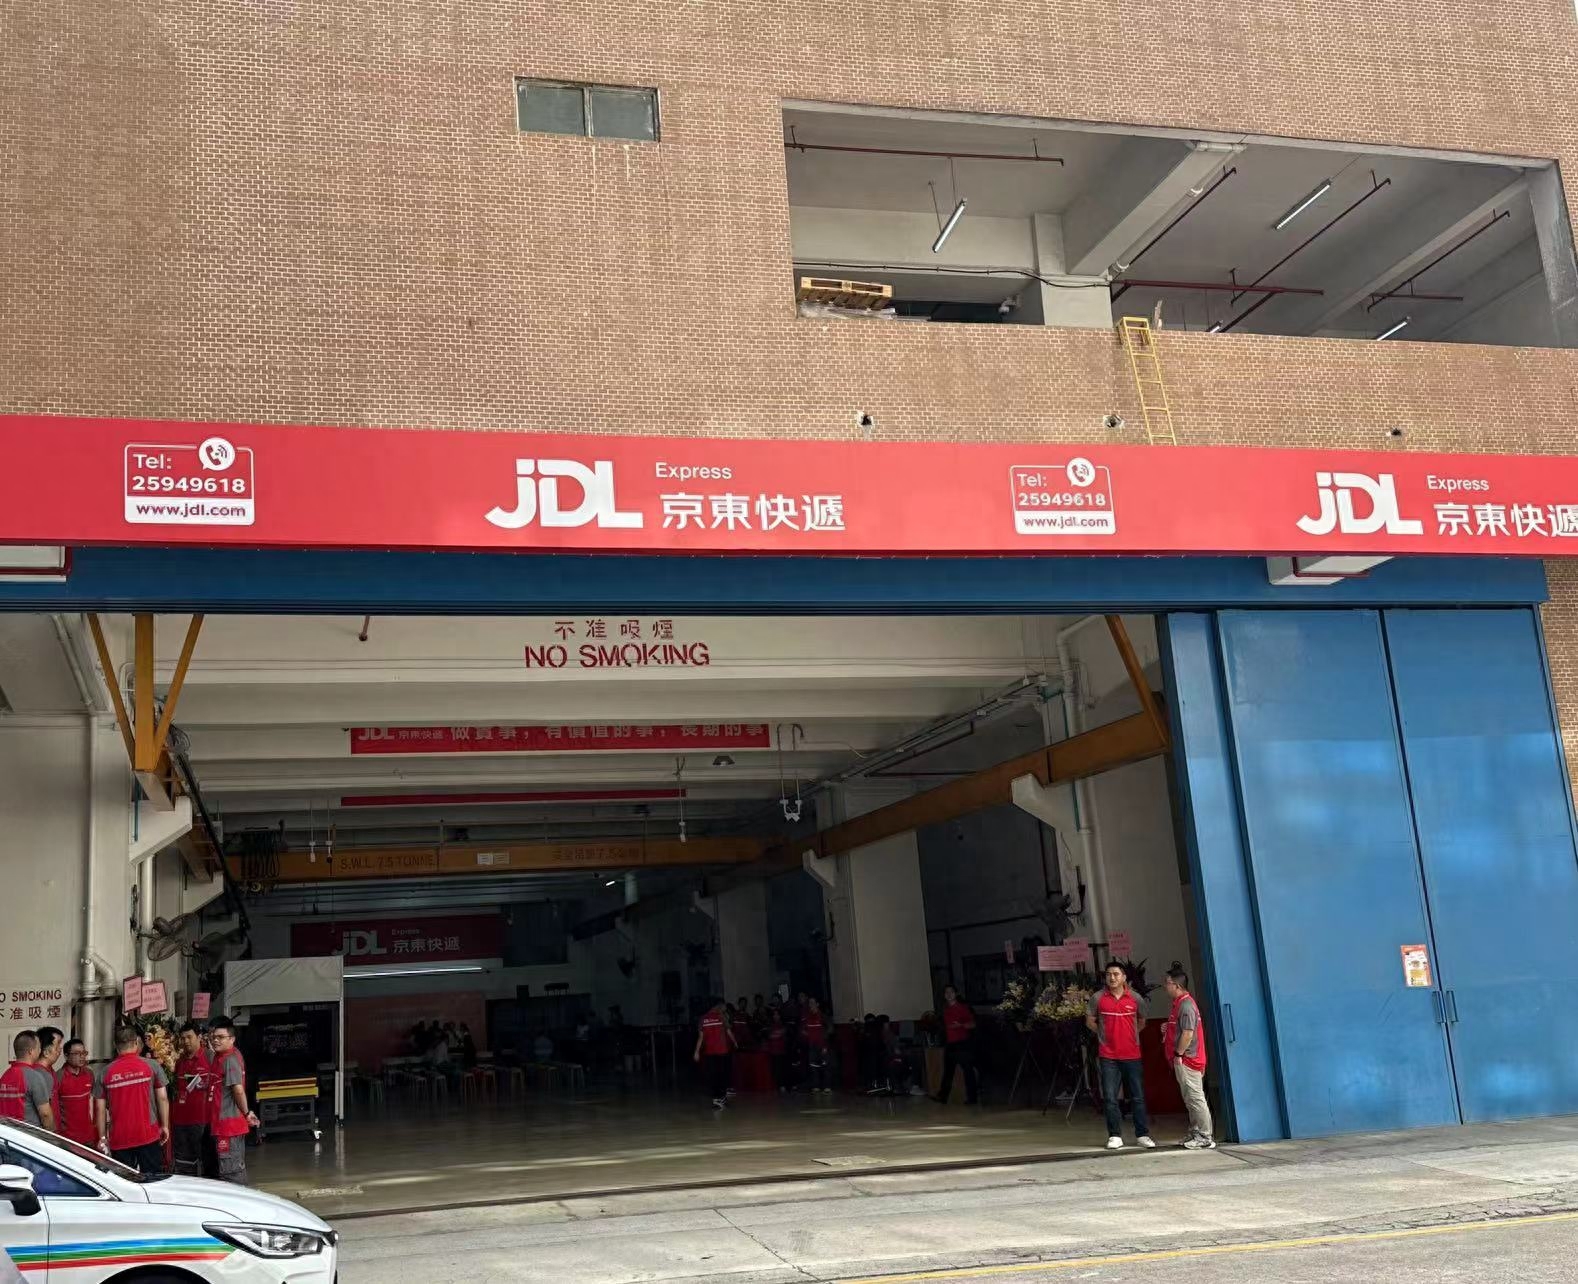 The fastest 4-hour delivery time in Hong Kong: JD, Hong Kong, and Macau have opened multiple self operated centers, accelerating the competition among express delivery giants